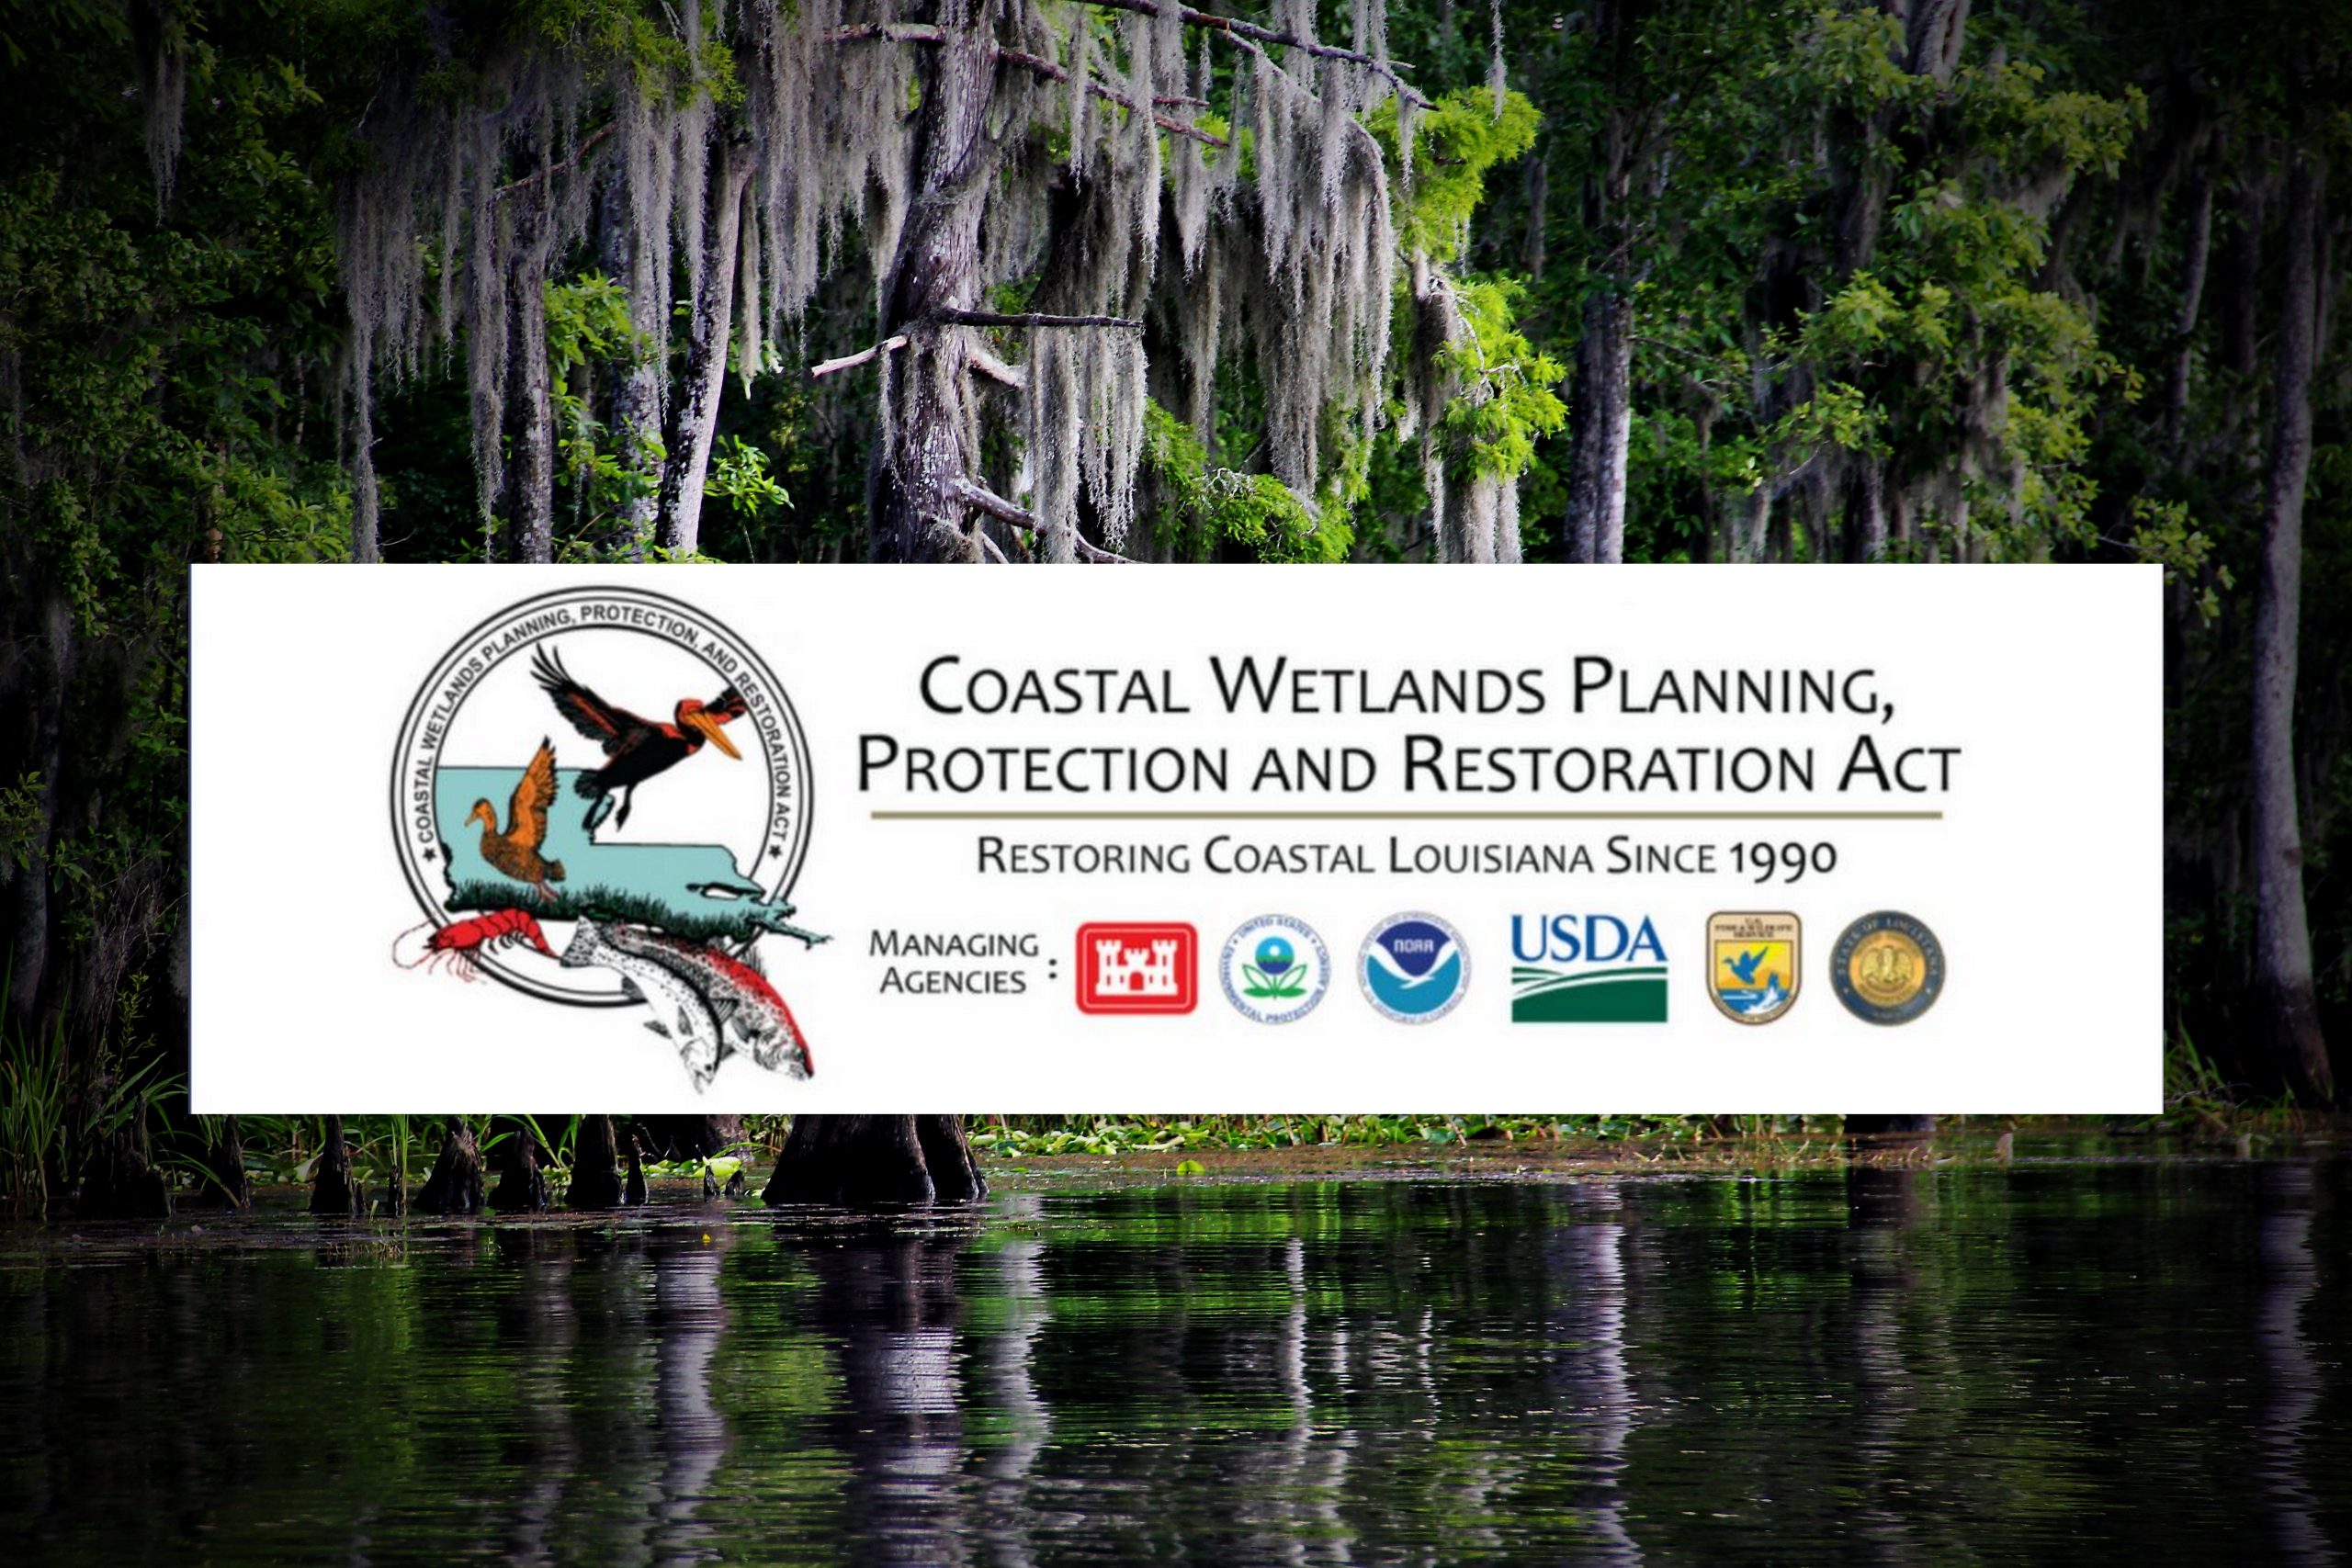 Coastal Wetlands Protection And Restoration Act (Barataria Projects)